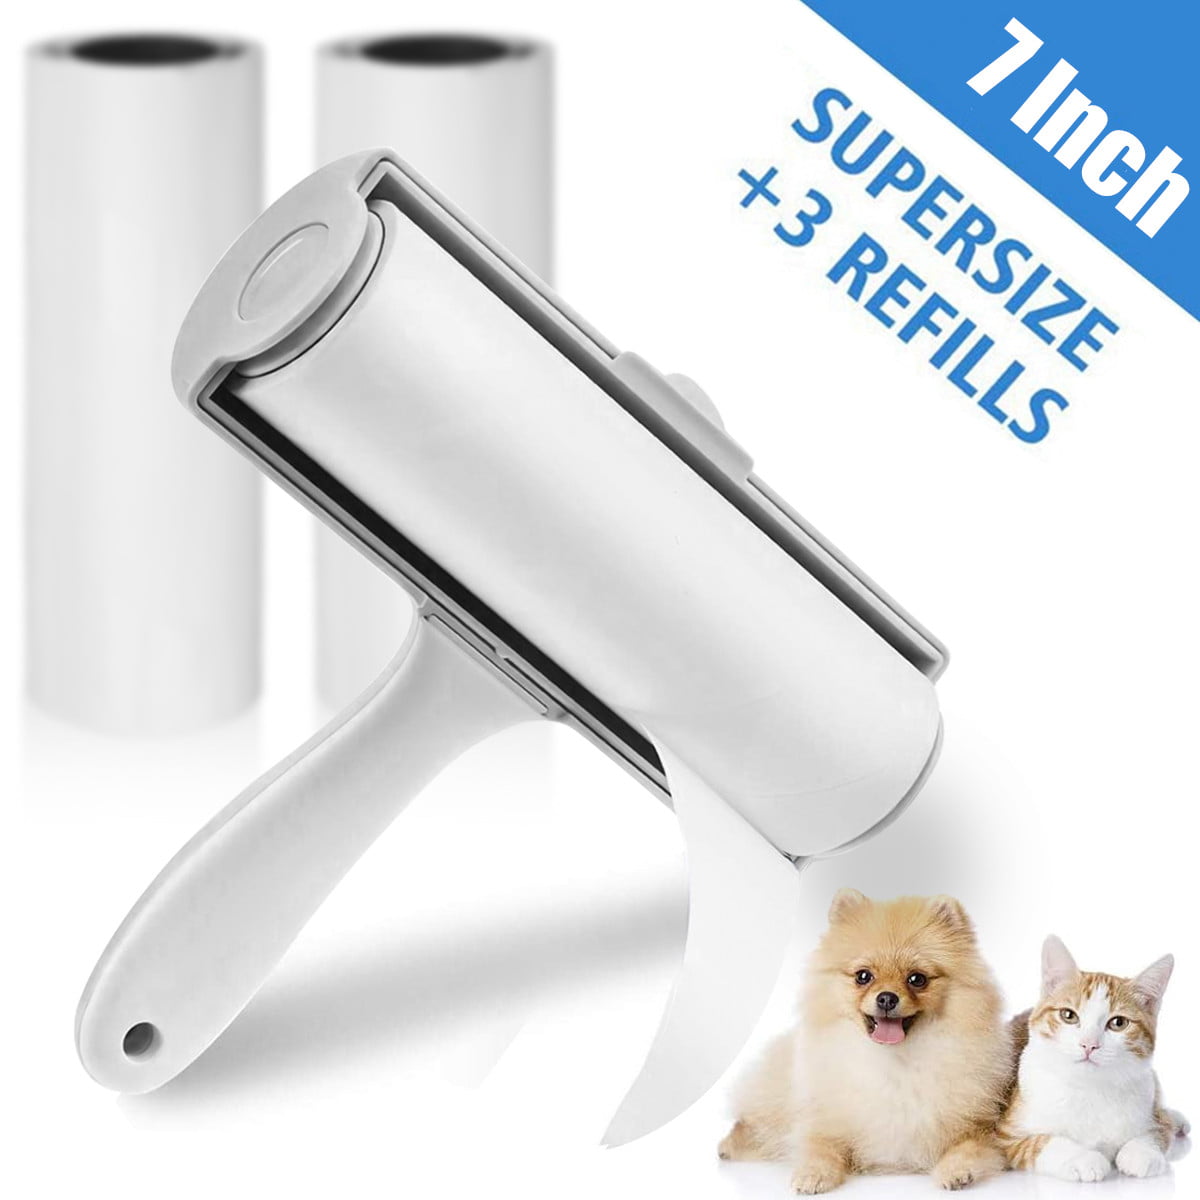 240 Sheets Sofa Clothes Pet Hair Extra Sticky Lint Roller With 4 Refill Packs 